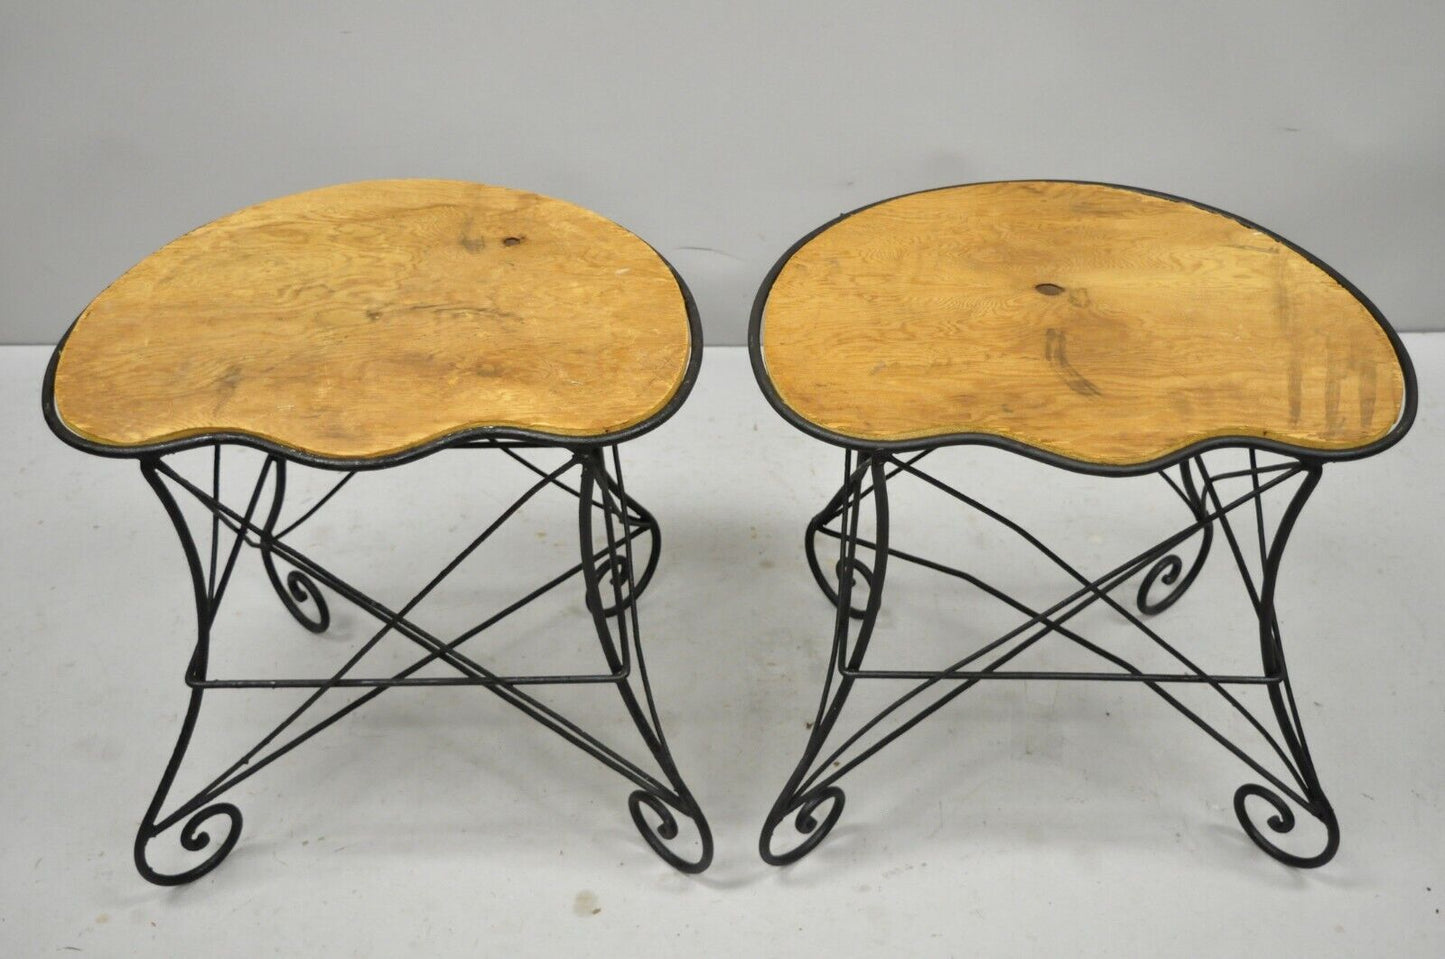 Pair French Art Nouveau Style Stool Bench Seats w/ Scrolling Wrought Iron Frame